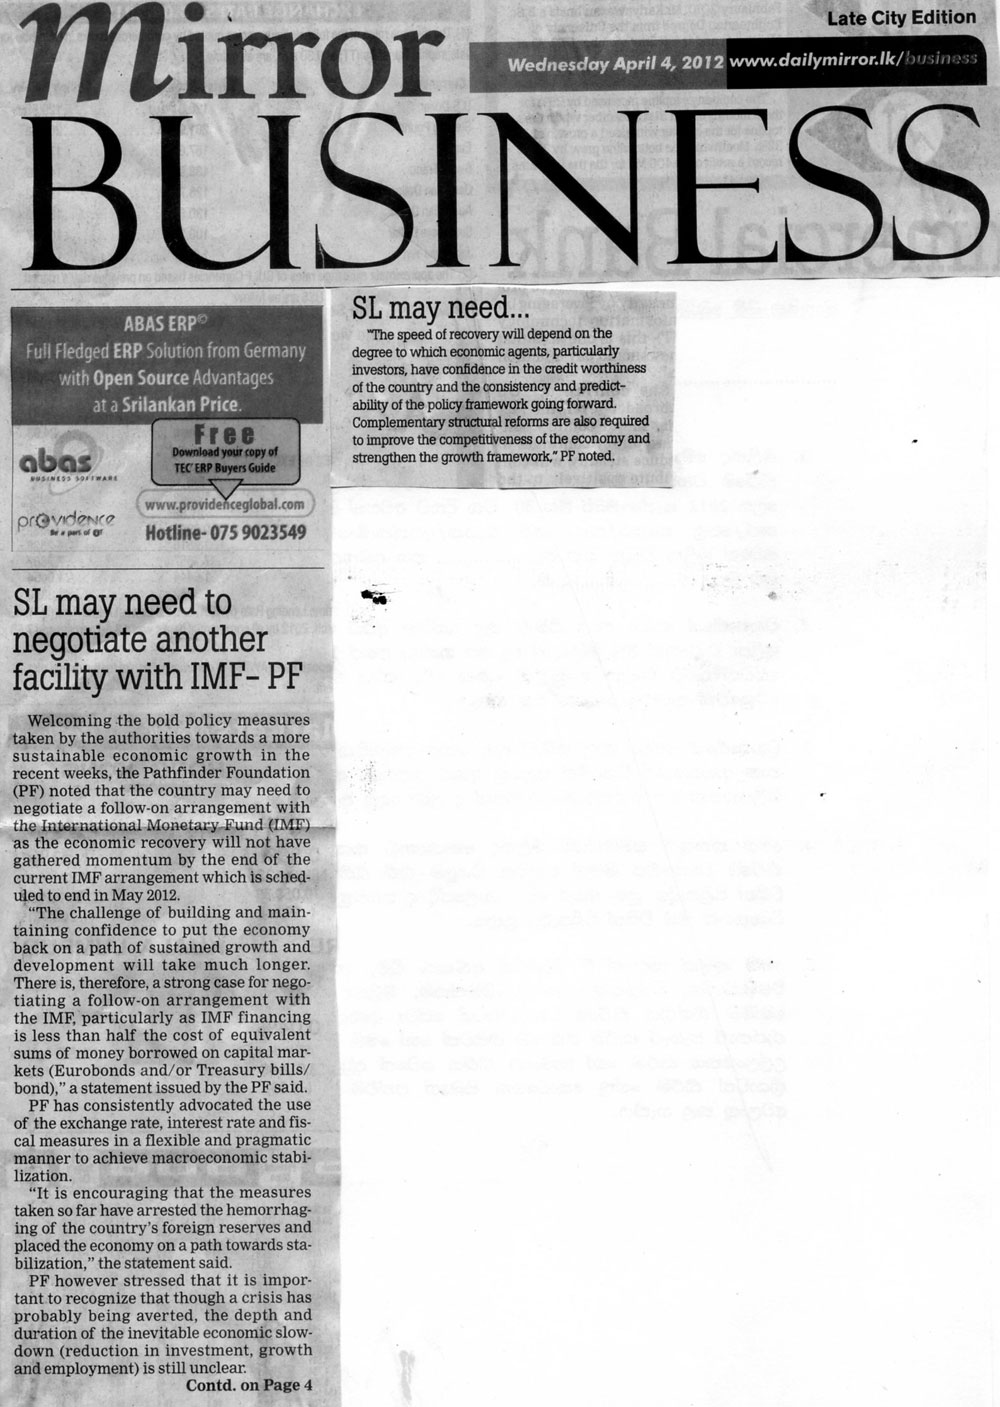 Daily Mirror Business 040412